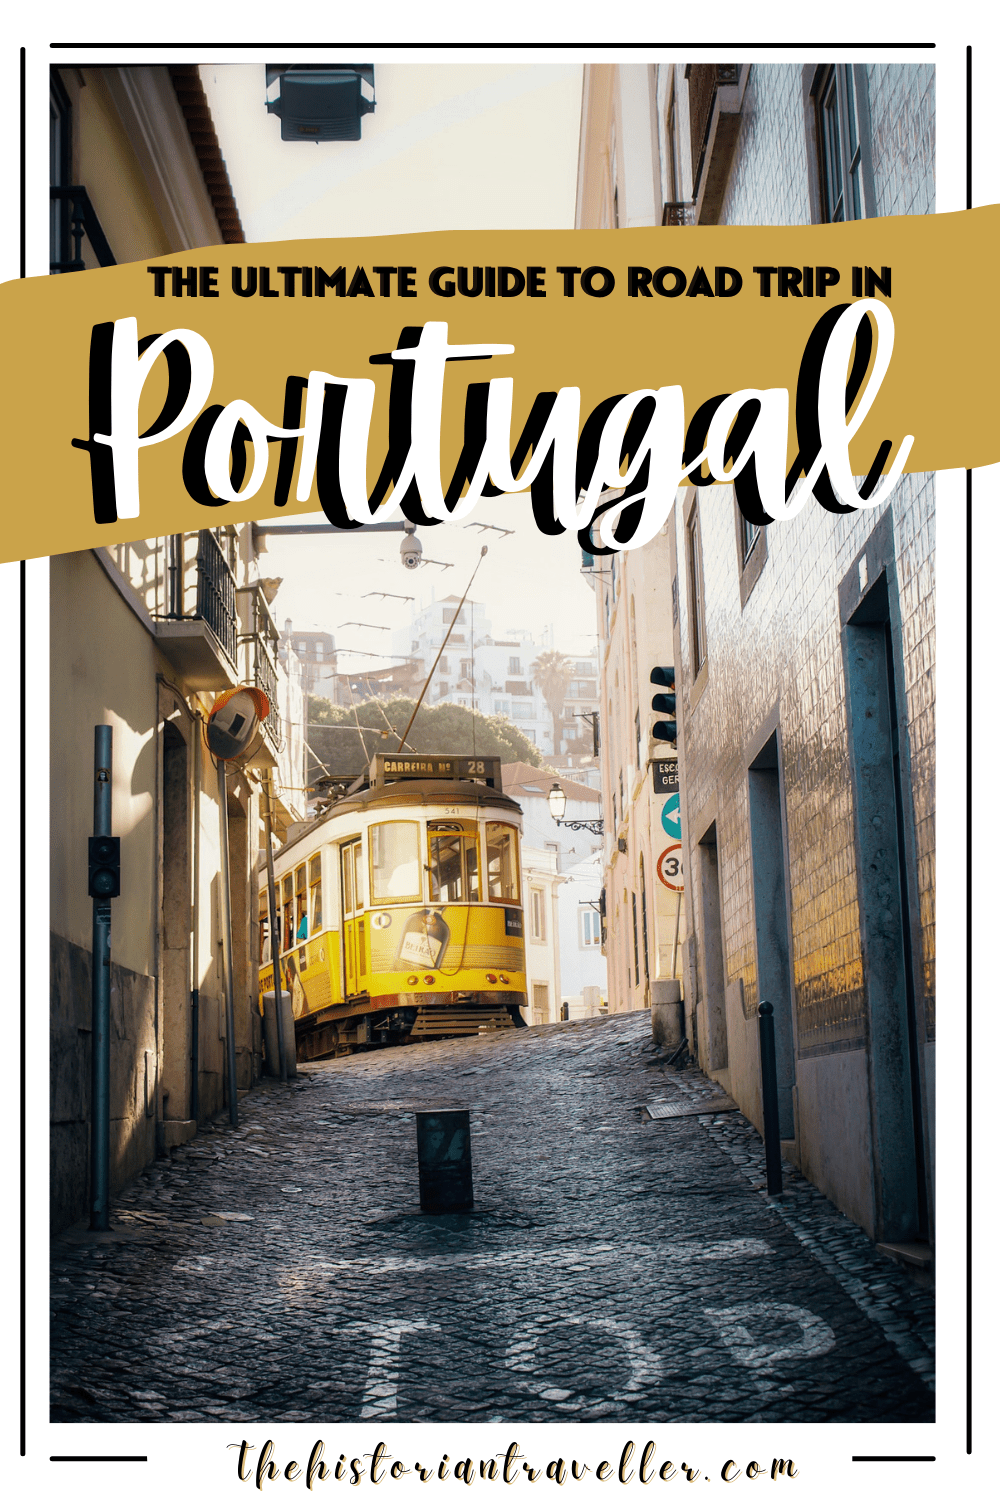 The Complete Guide to Road trip in Portugal